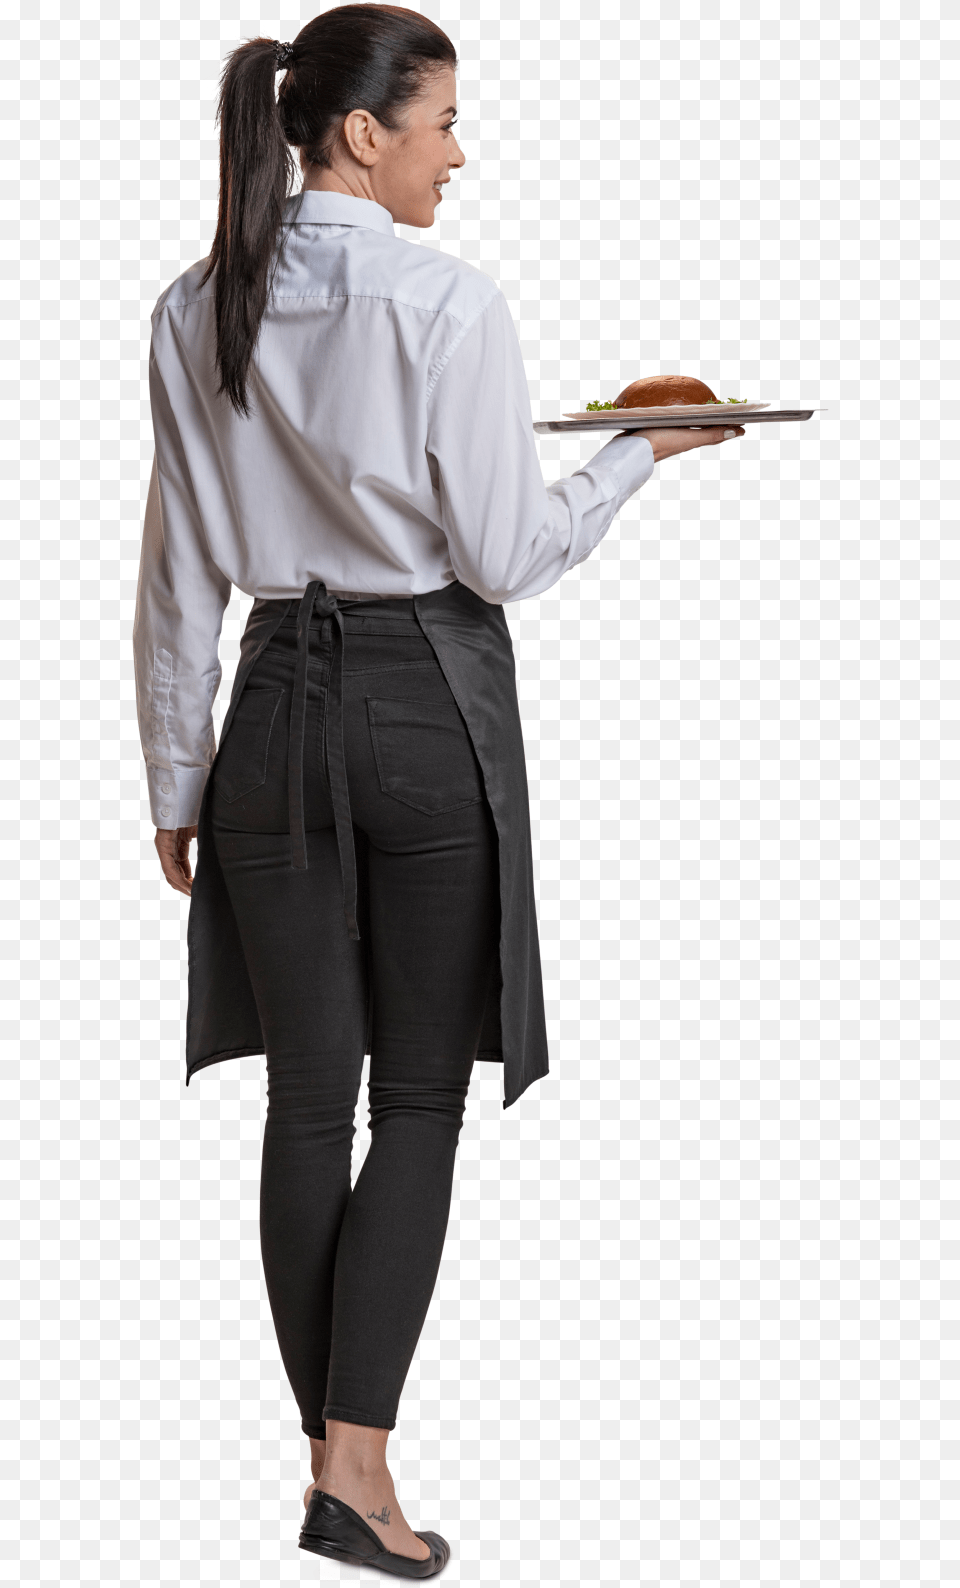 Cut Out Woman Waitress With Foow Professions And Services Waiter People, Long Sleeve, Pants, Blouse, Clothing Free Png Download